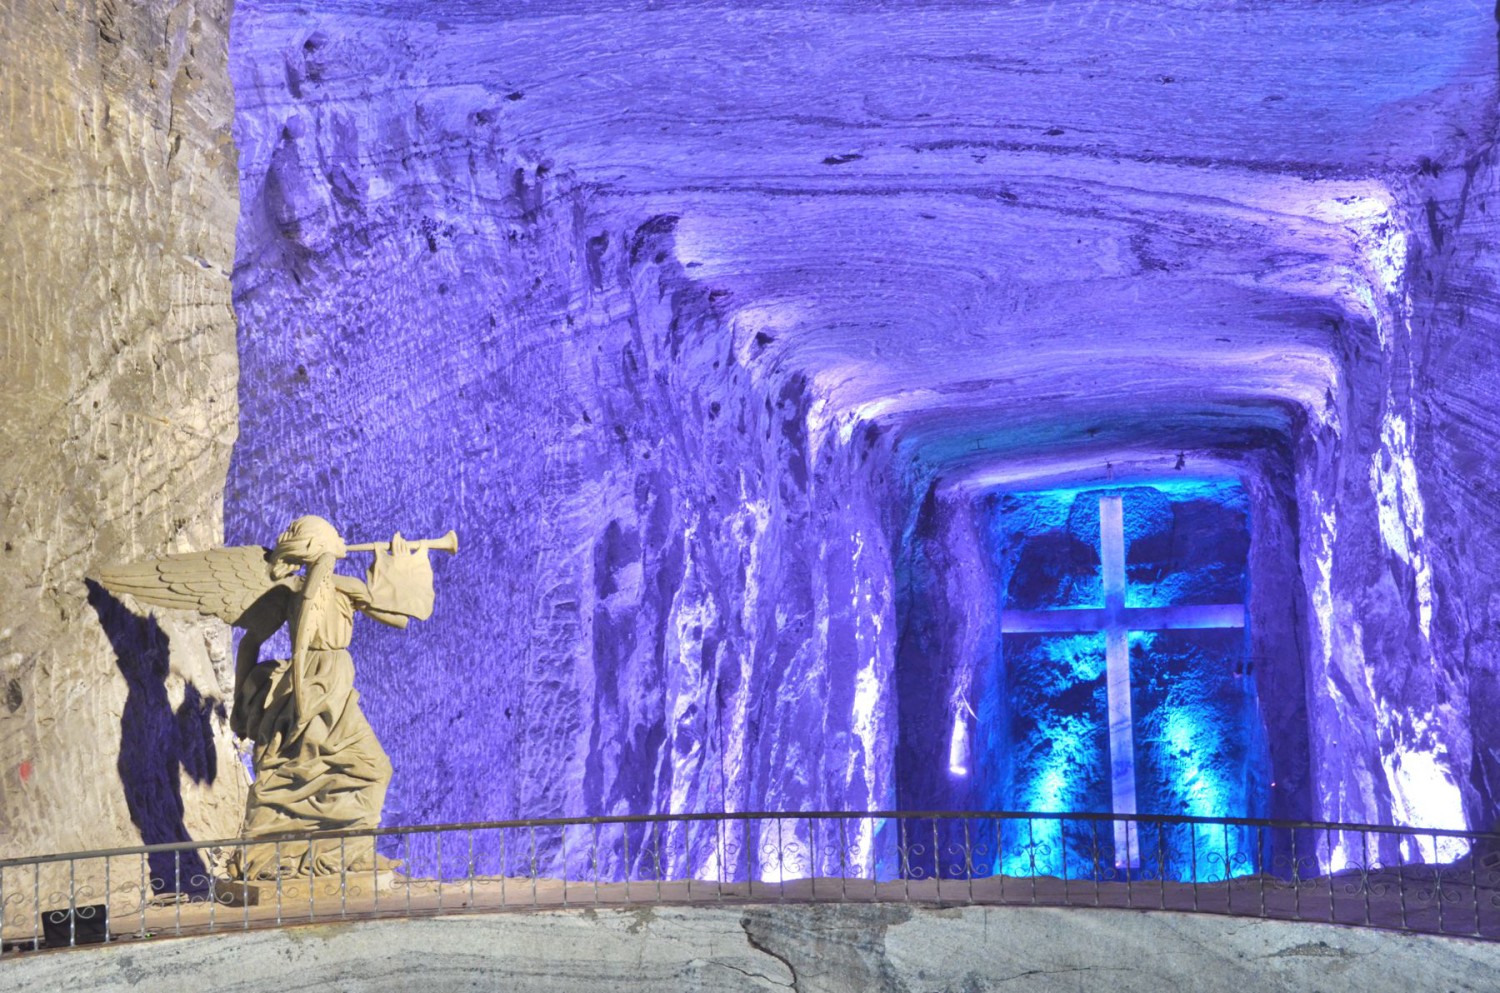 Salt Cathedral in Zipaquirá, Colombia